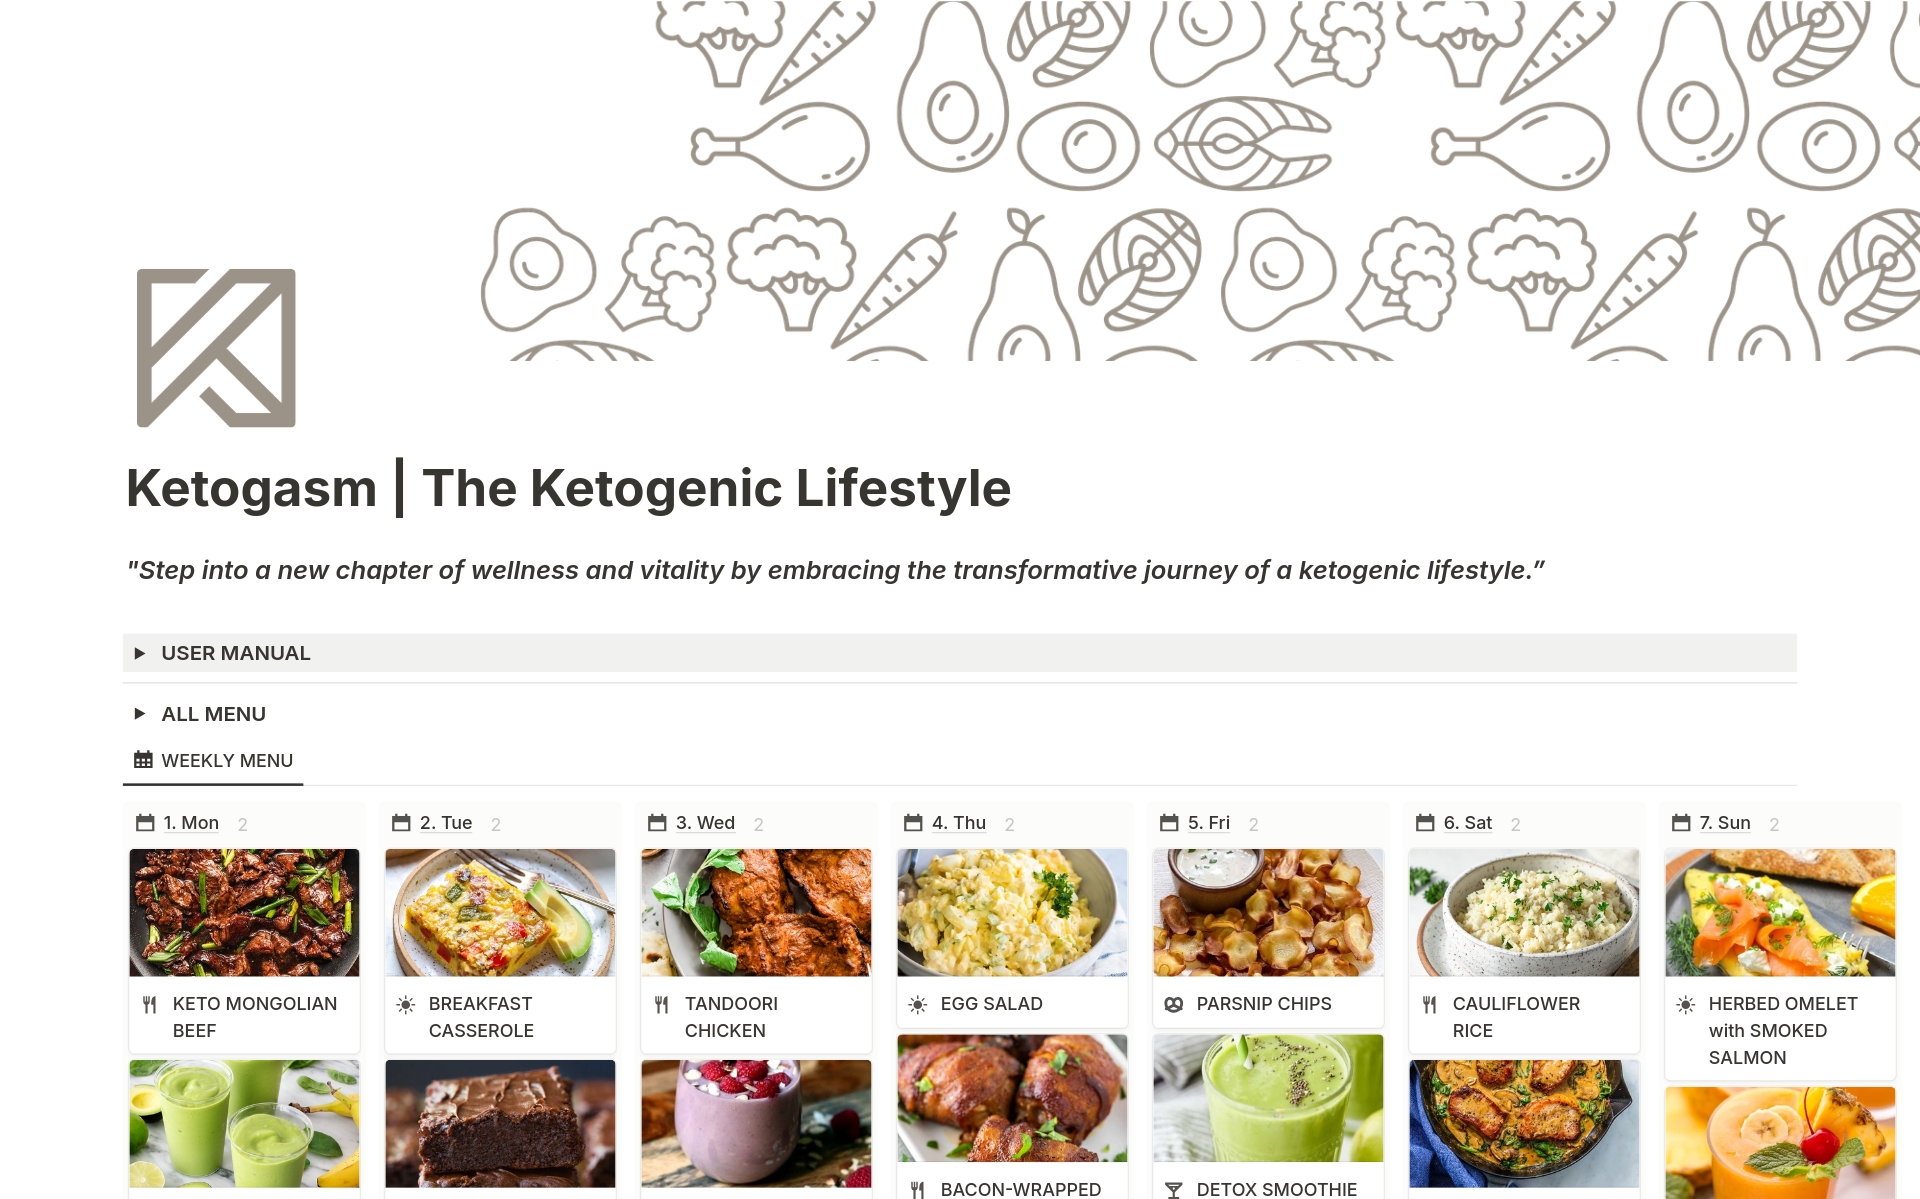 This Notion template empowers you to conquer your health goals with the Ketogenic lifestyle.